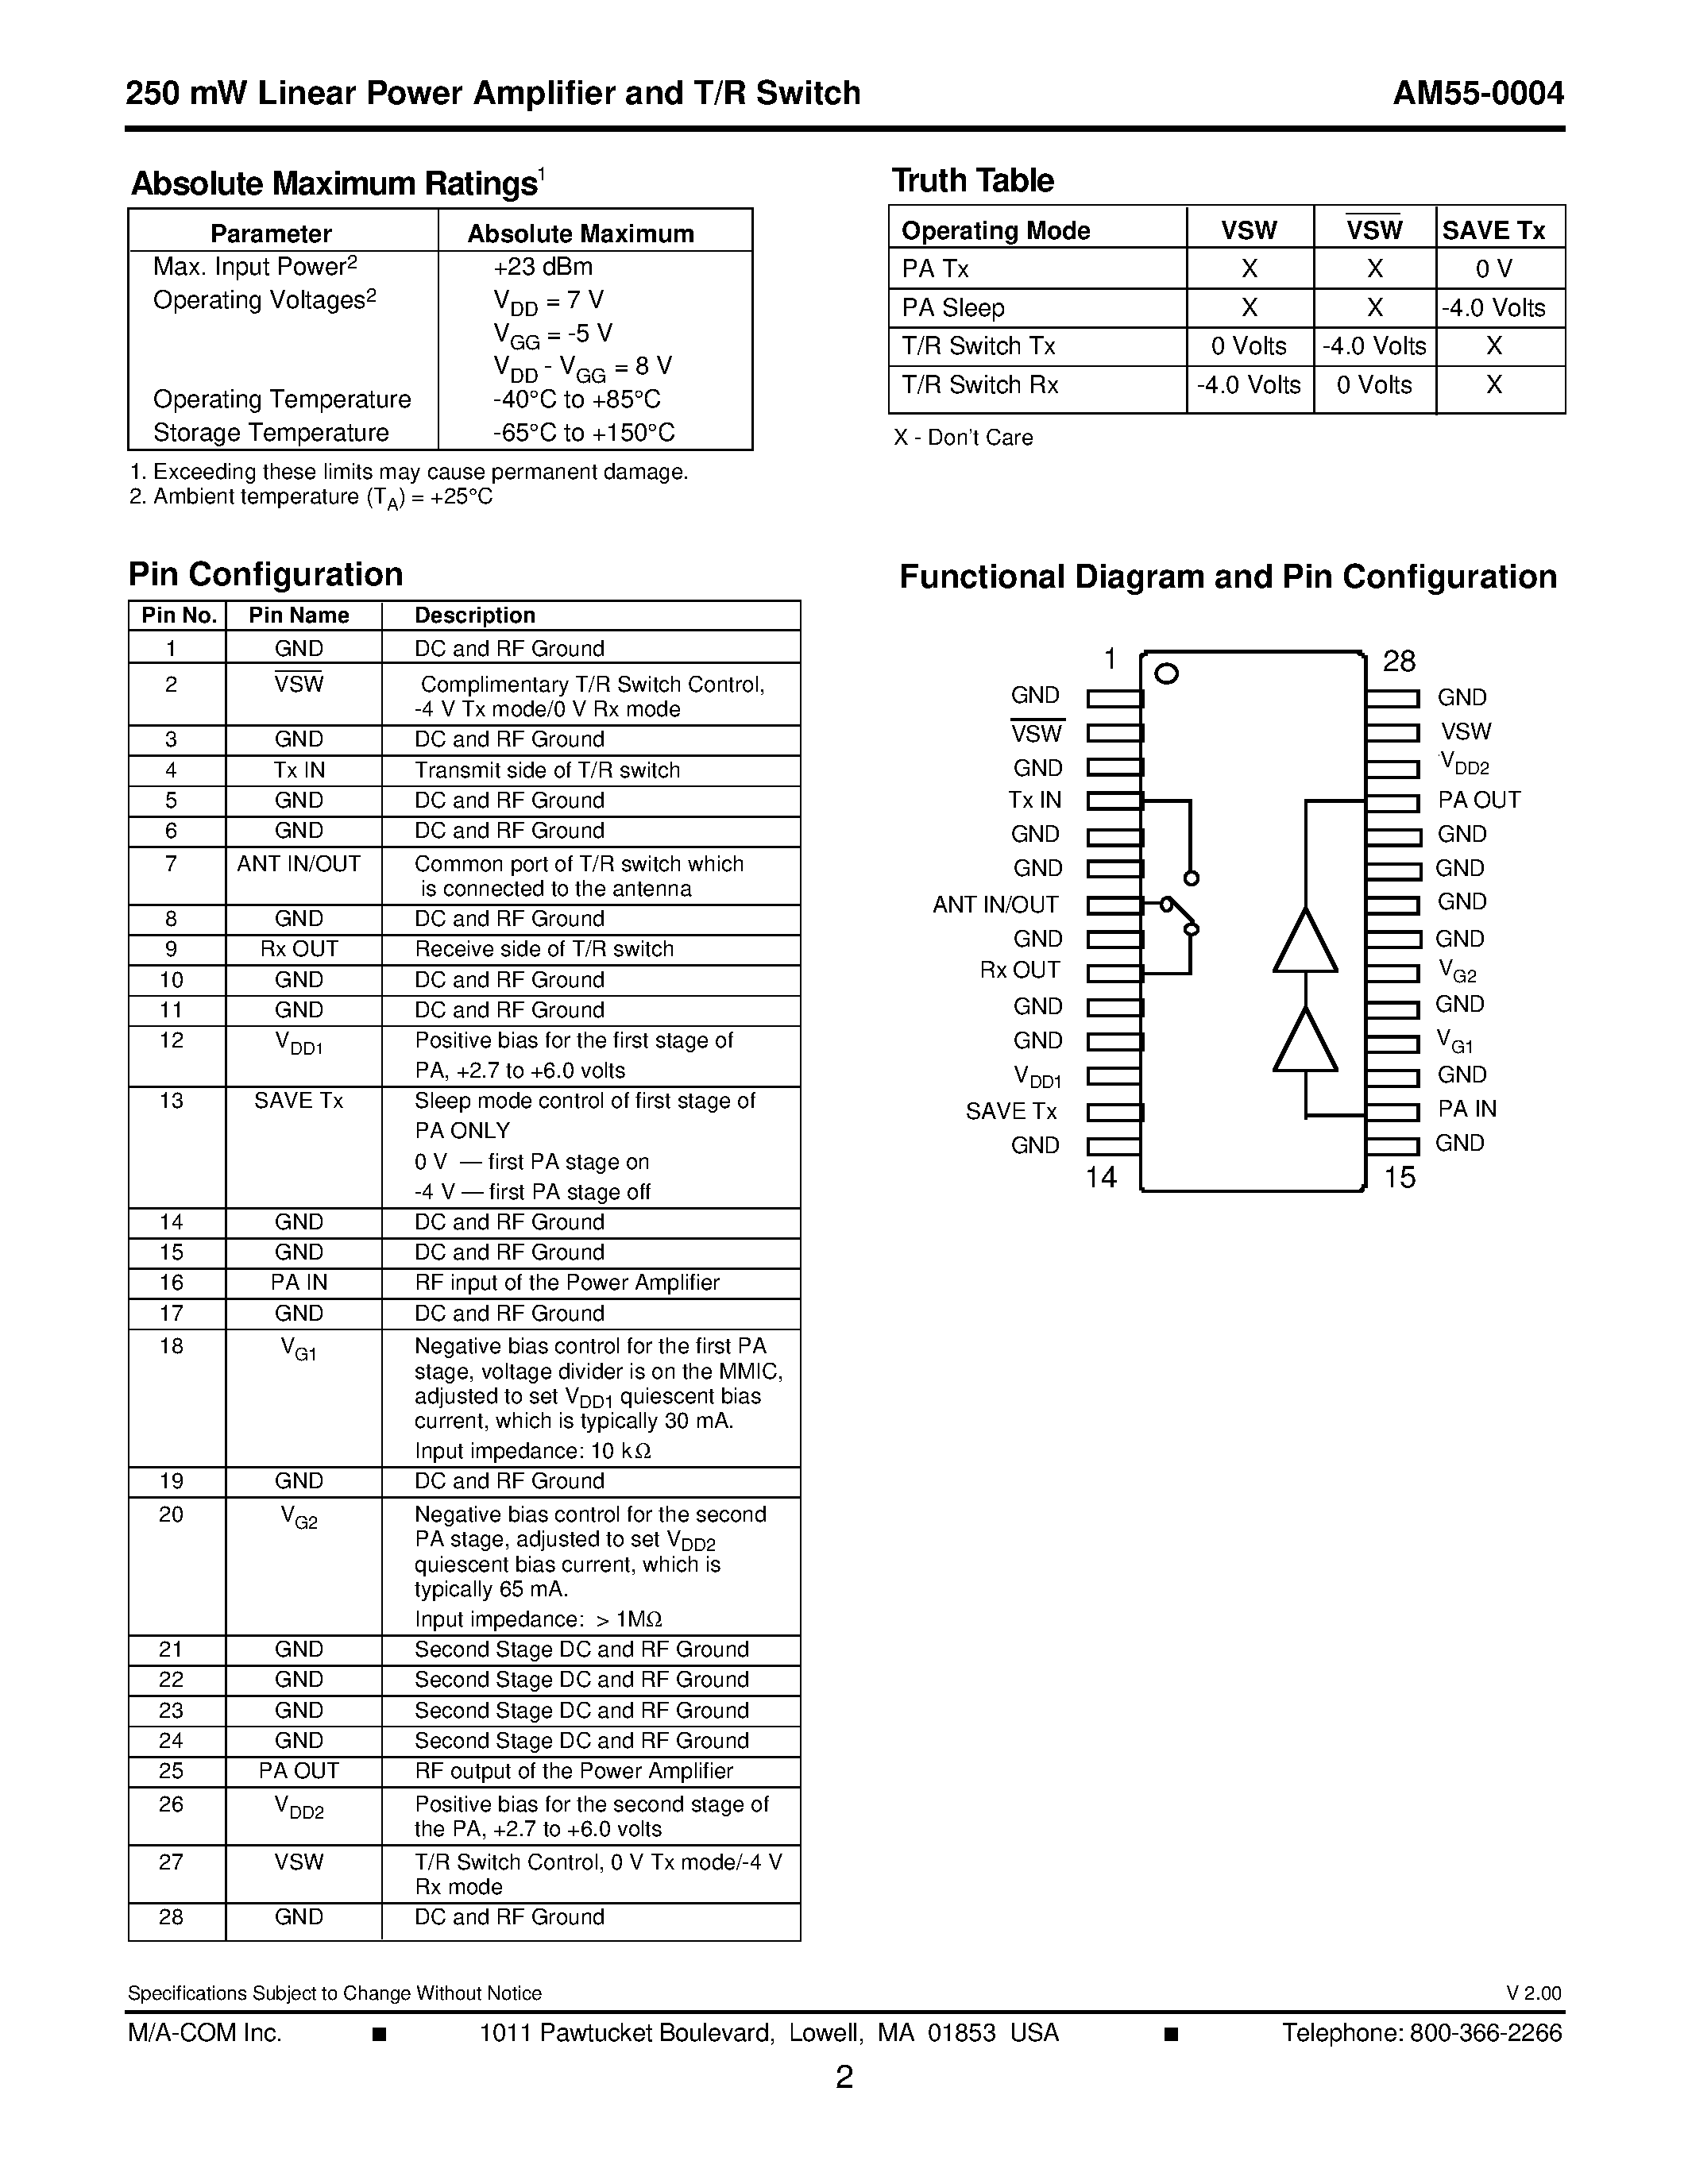 Datasheet AM55-0004 - 250 mW Linear Power Amplifier and T/R Switch 1.8 - 2.0 GHz page 2